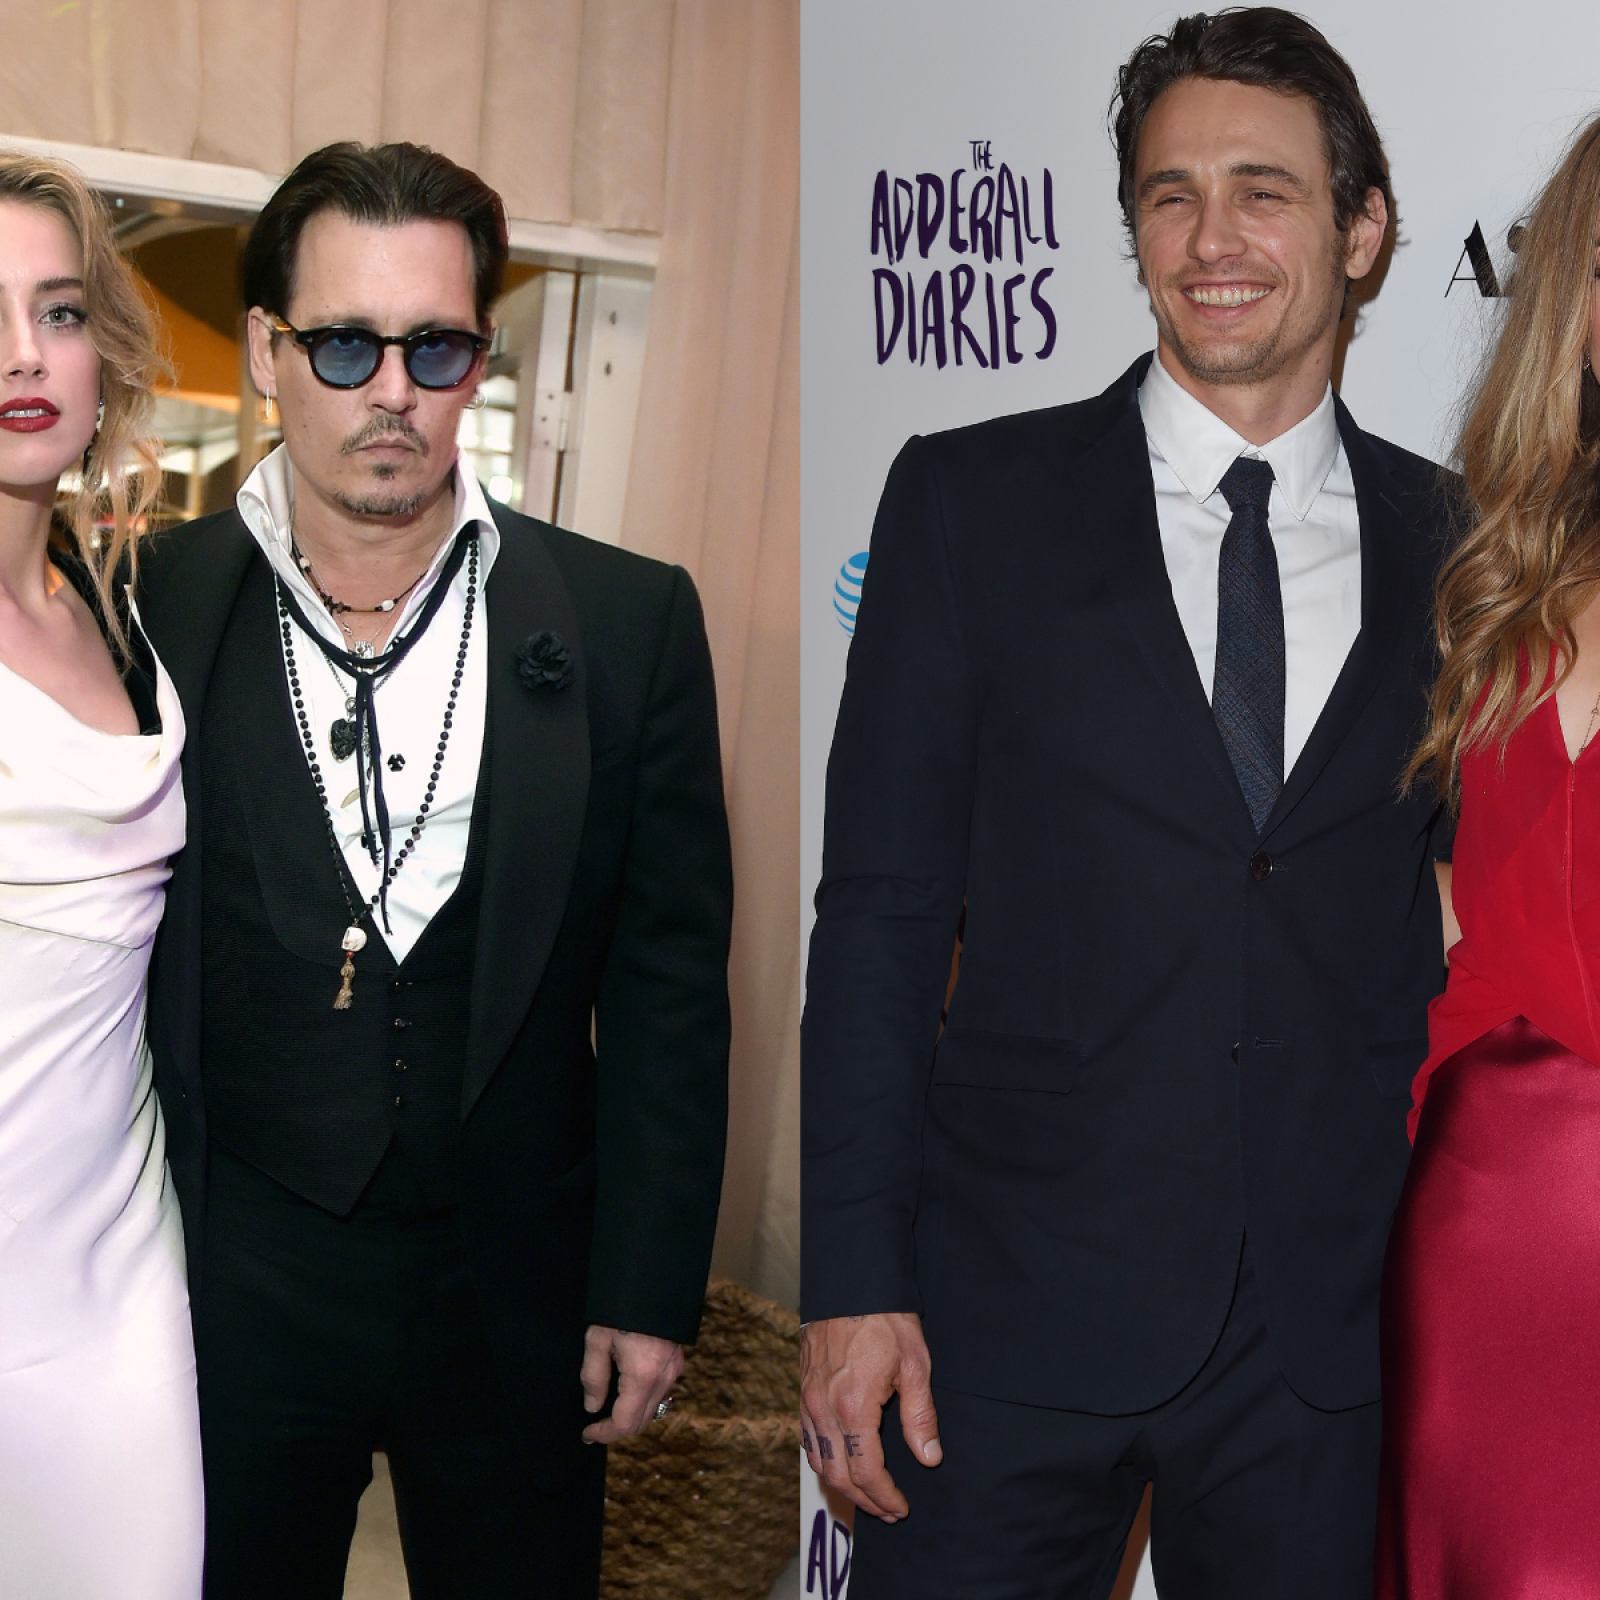 What Does James Franco Have to Do With Amber Heard v. Johnny Depp Case?